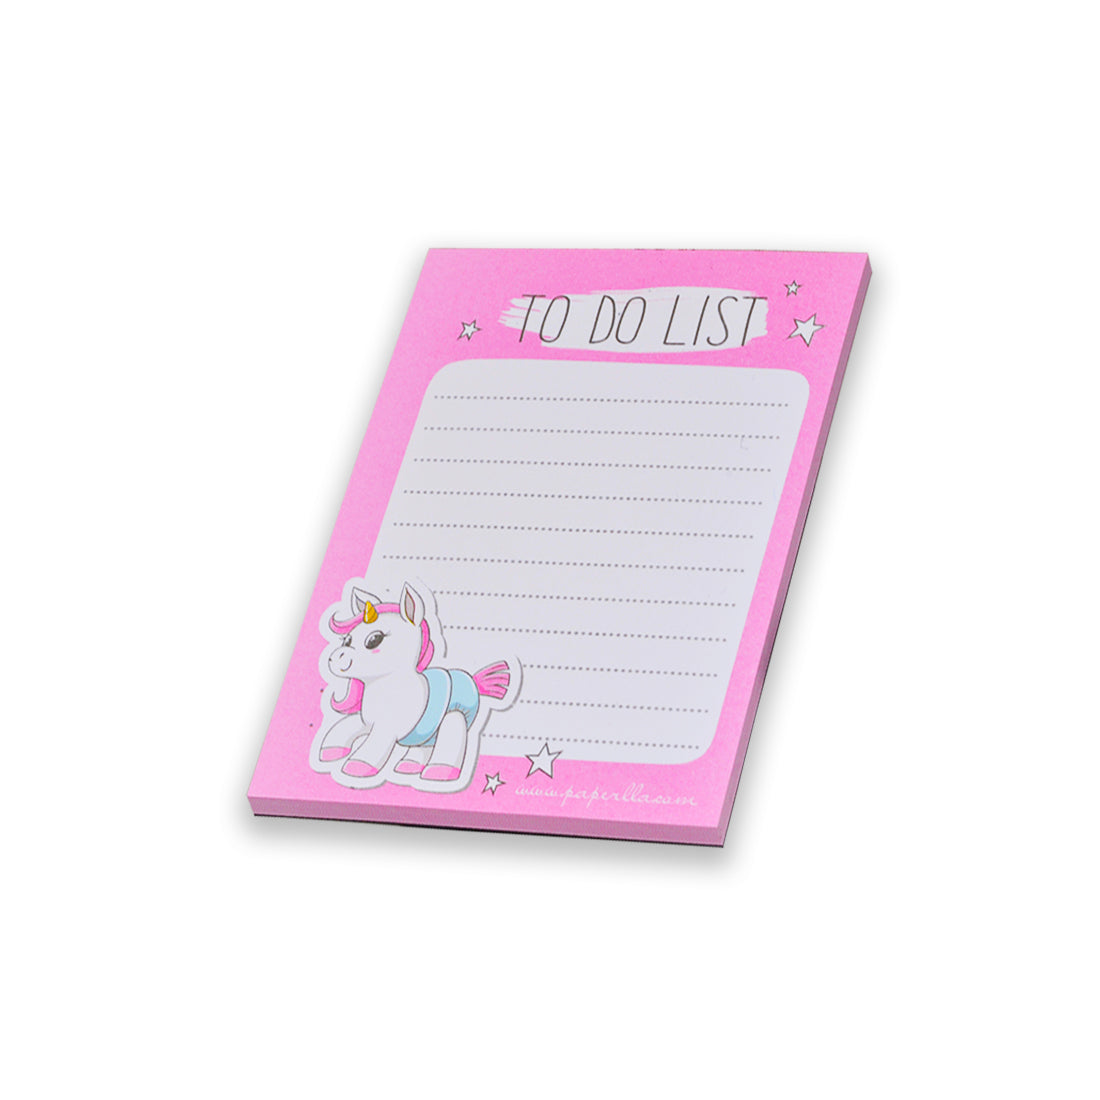 DAY PLANNER JOURNAL NOTEPADS, CUTE STATIONERY TO DO LIST DIARY NOTES MEMO PADS GIFT FOR OFFICE GOING MEN AND WOMEN, SET OF 6